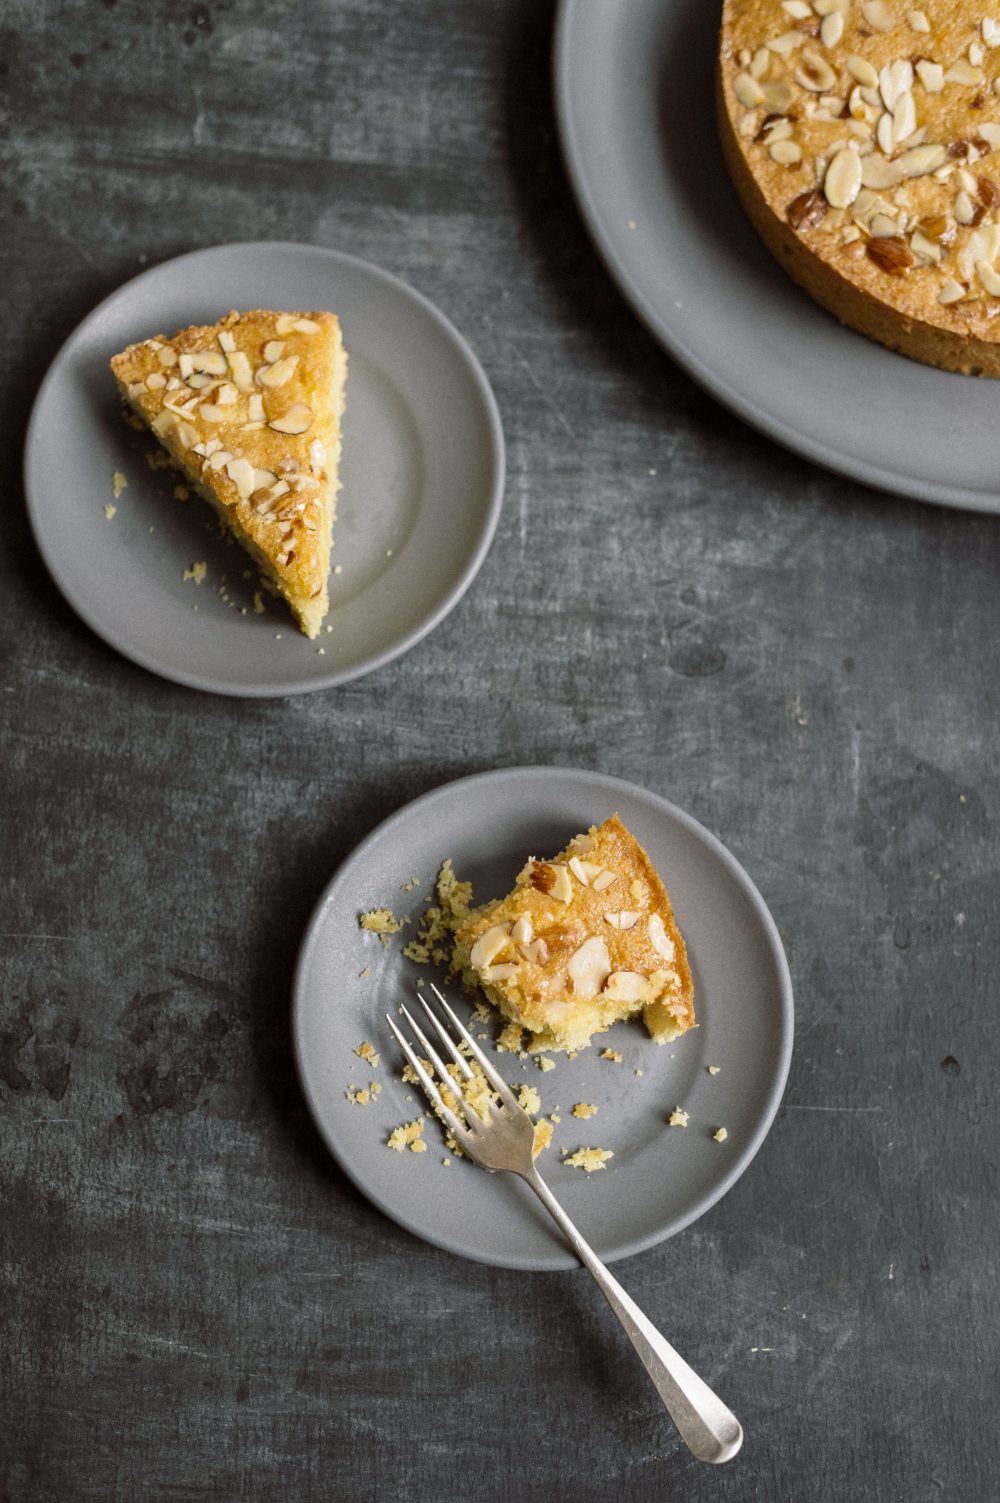 Tangerine-Almond Cake with Bay-Infused Syrup